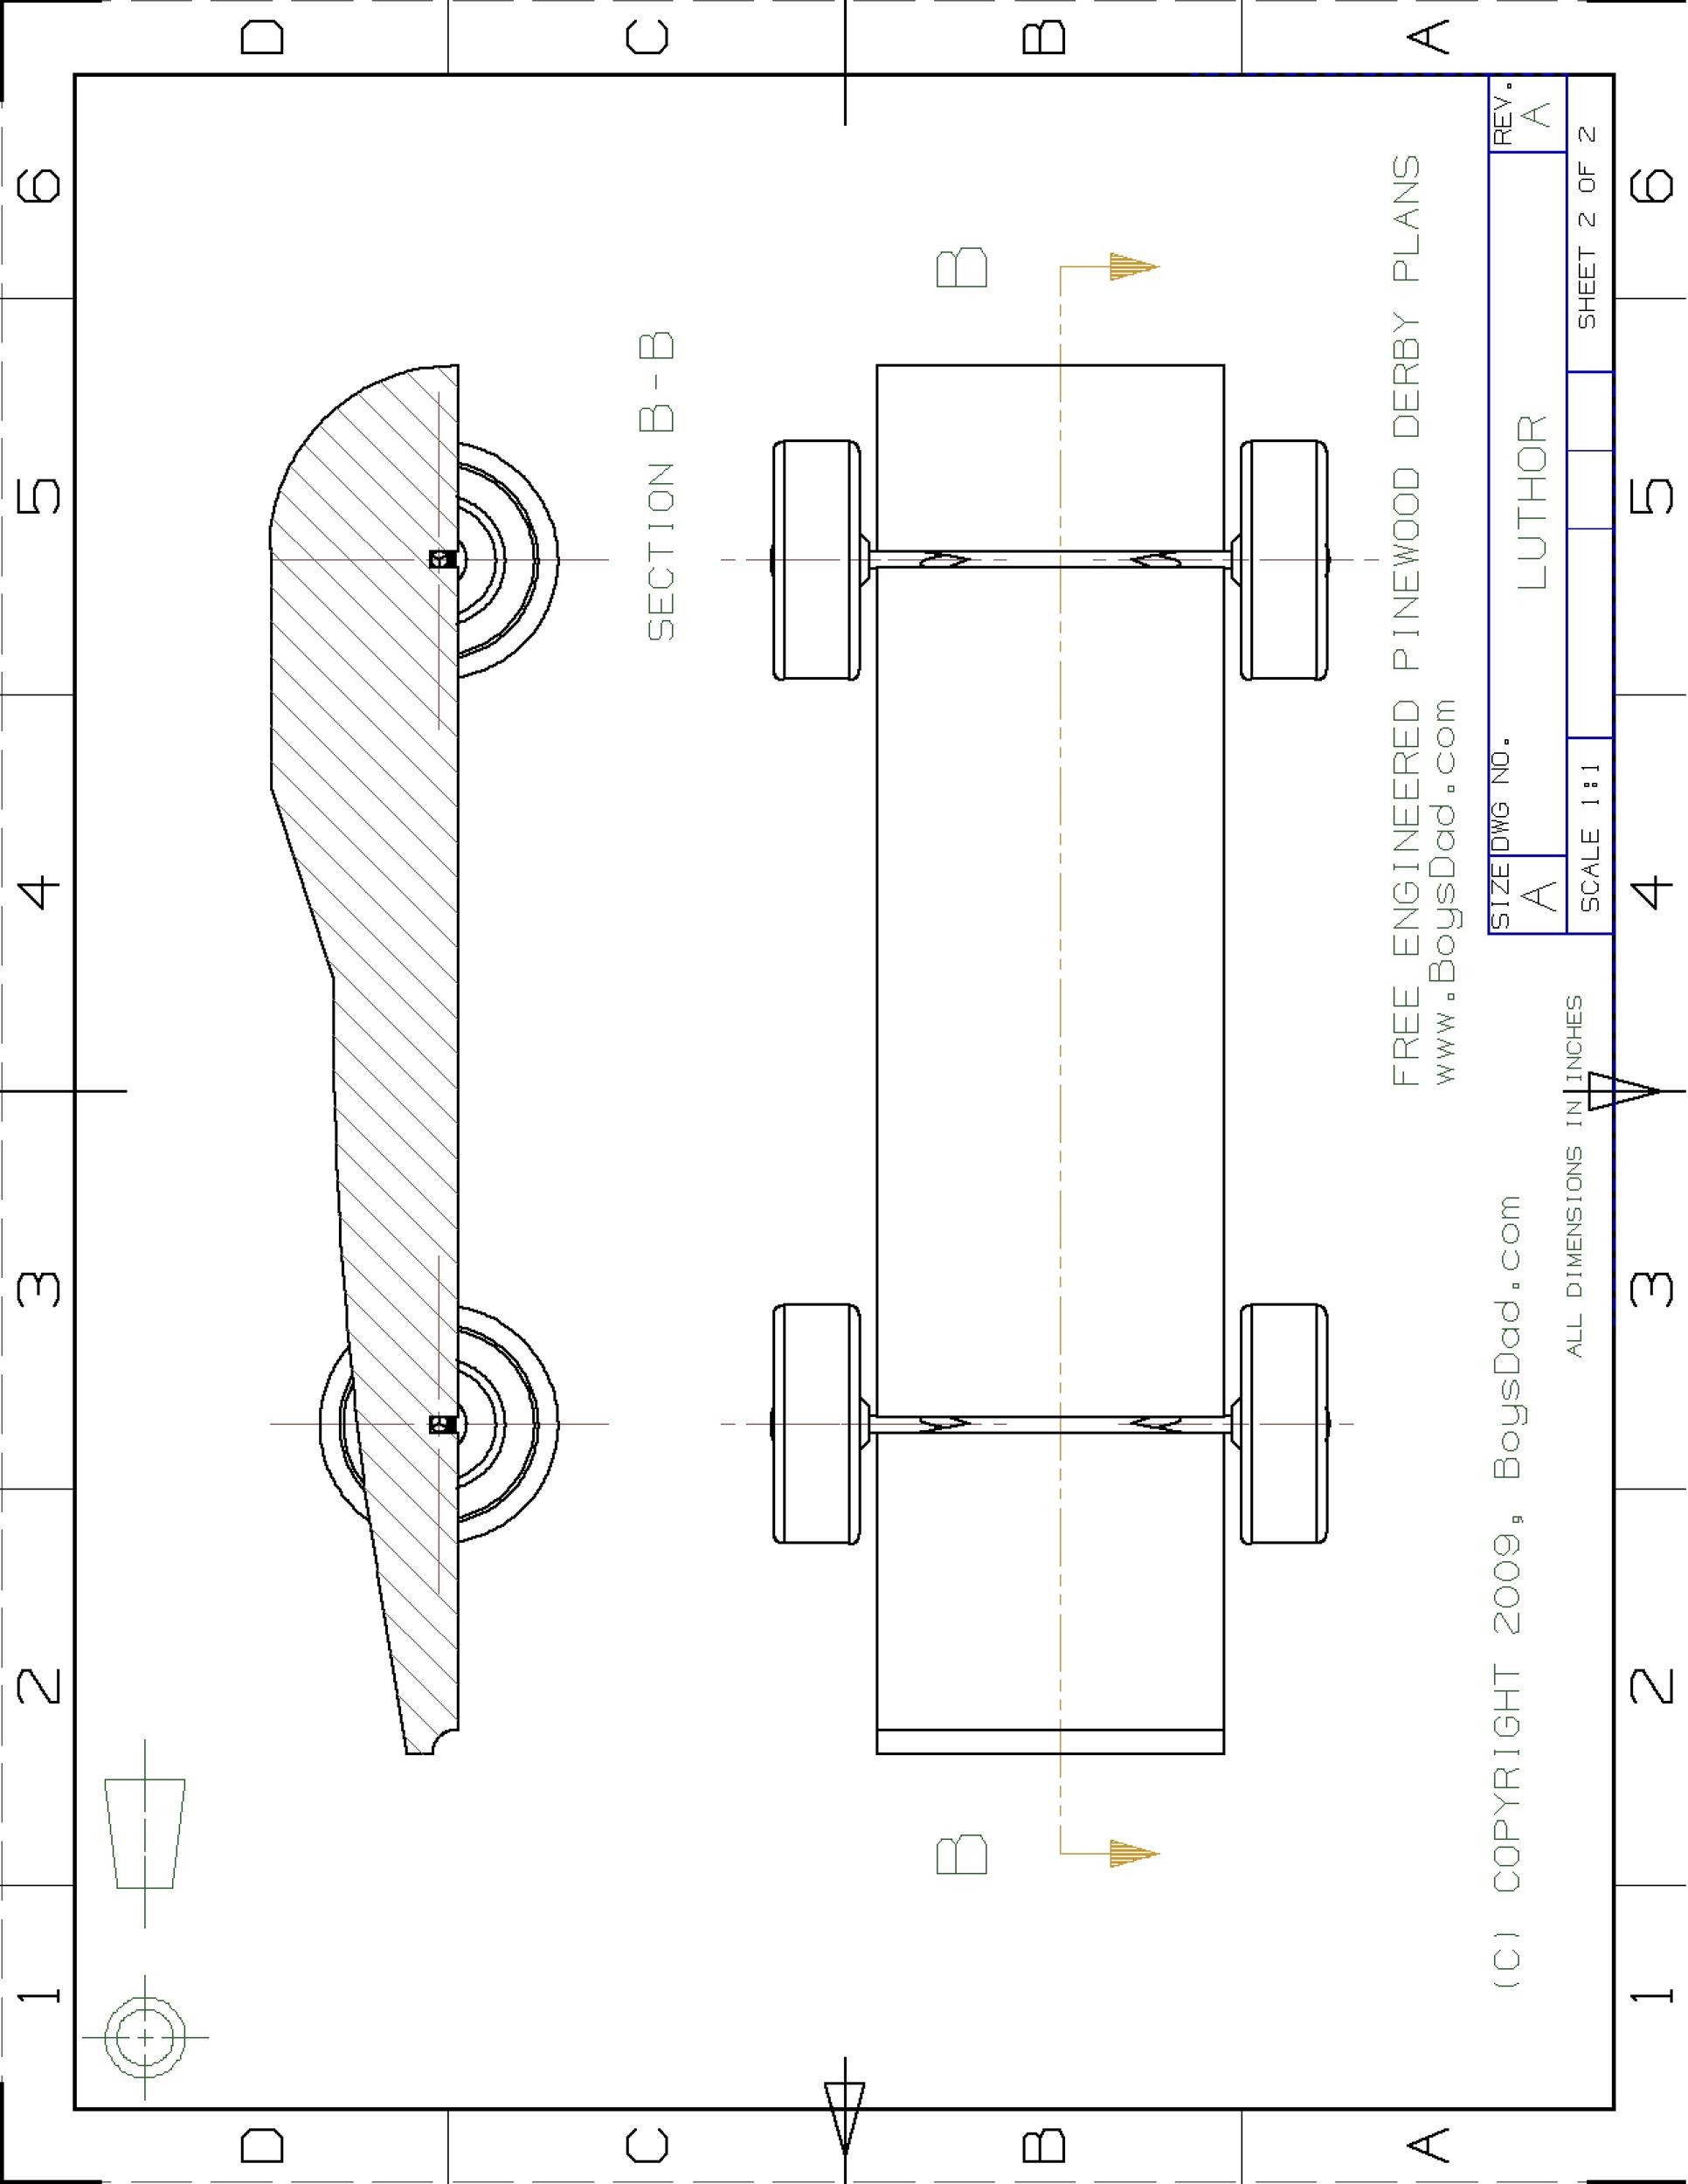 39 Awesome Pinewood Derby Car Designs Templates ᐅ TemplateLab